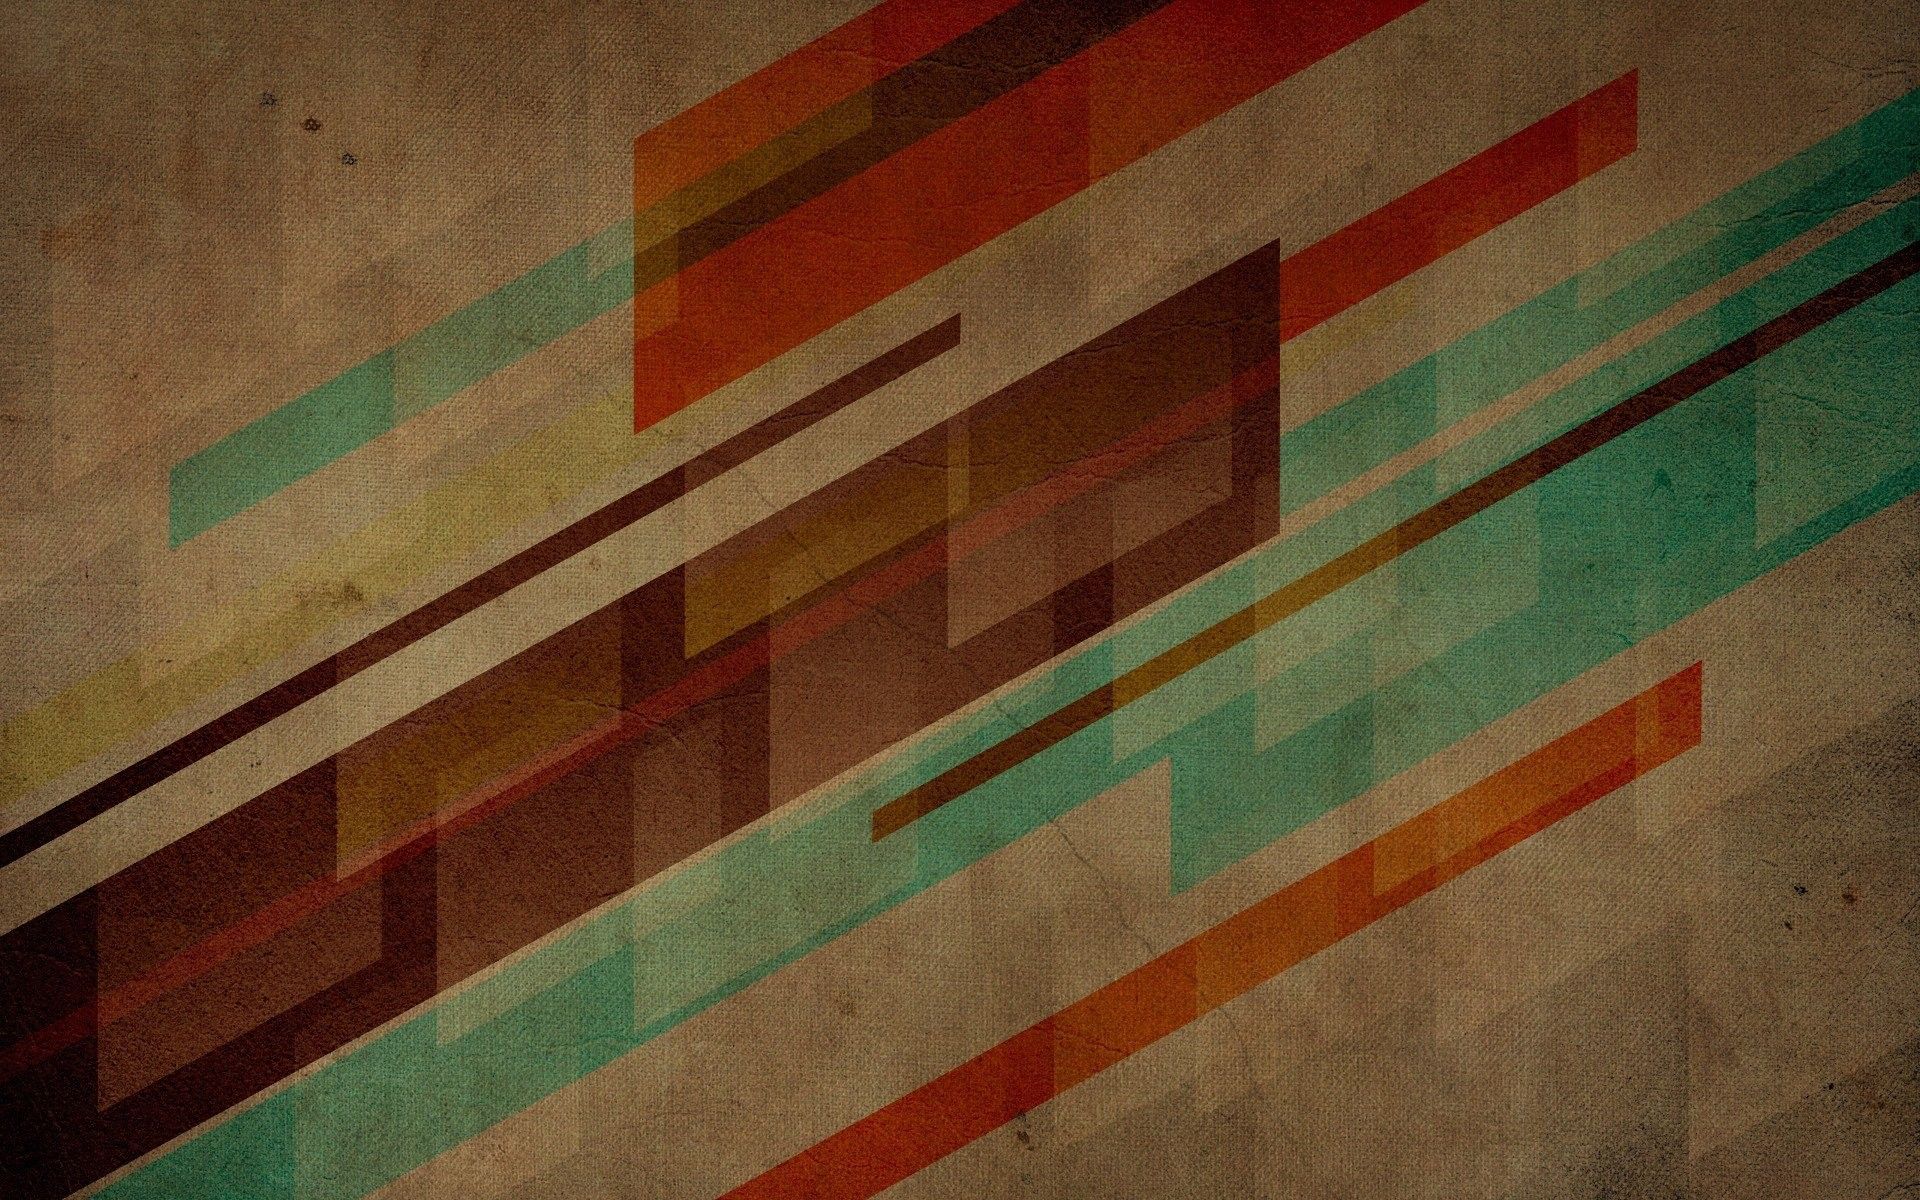 Abstract, Retro, Abstract Tumblr Wallpaper, Colors, Abstract Art, Multicolor, Art, Cool Imageabstract Wallpaper